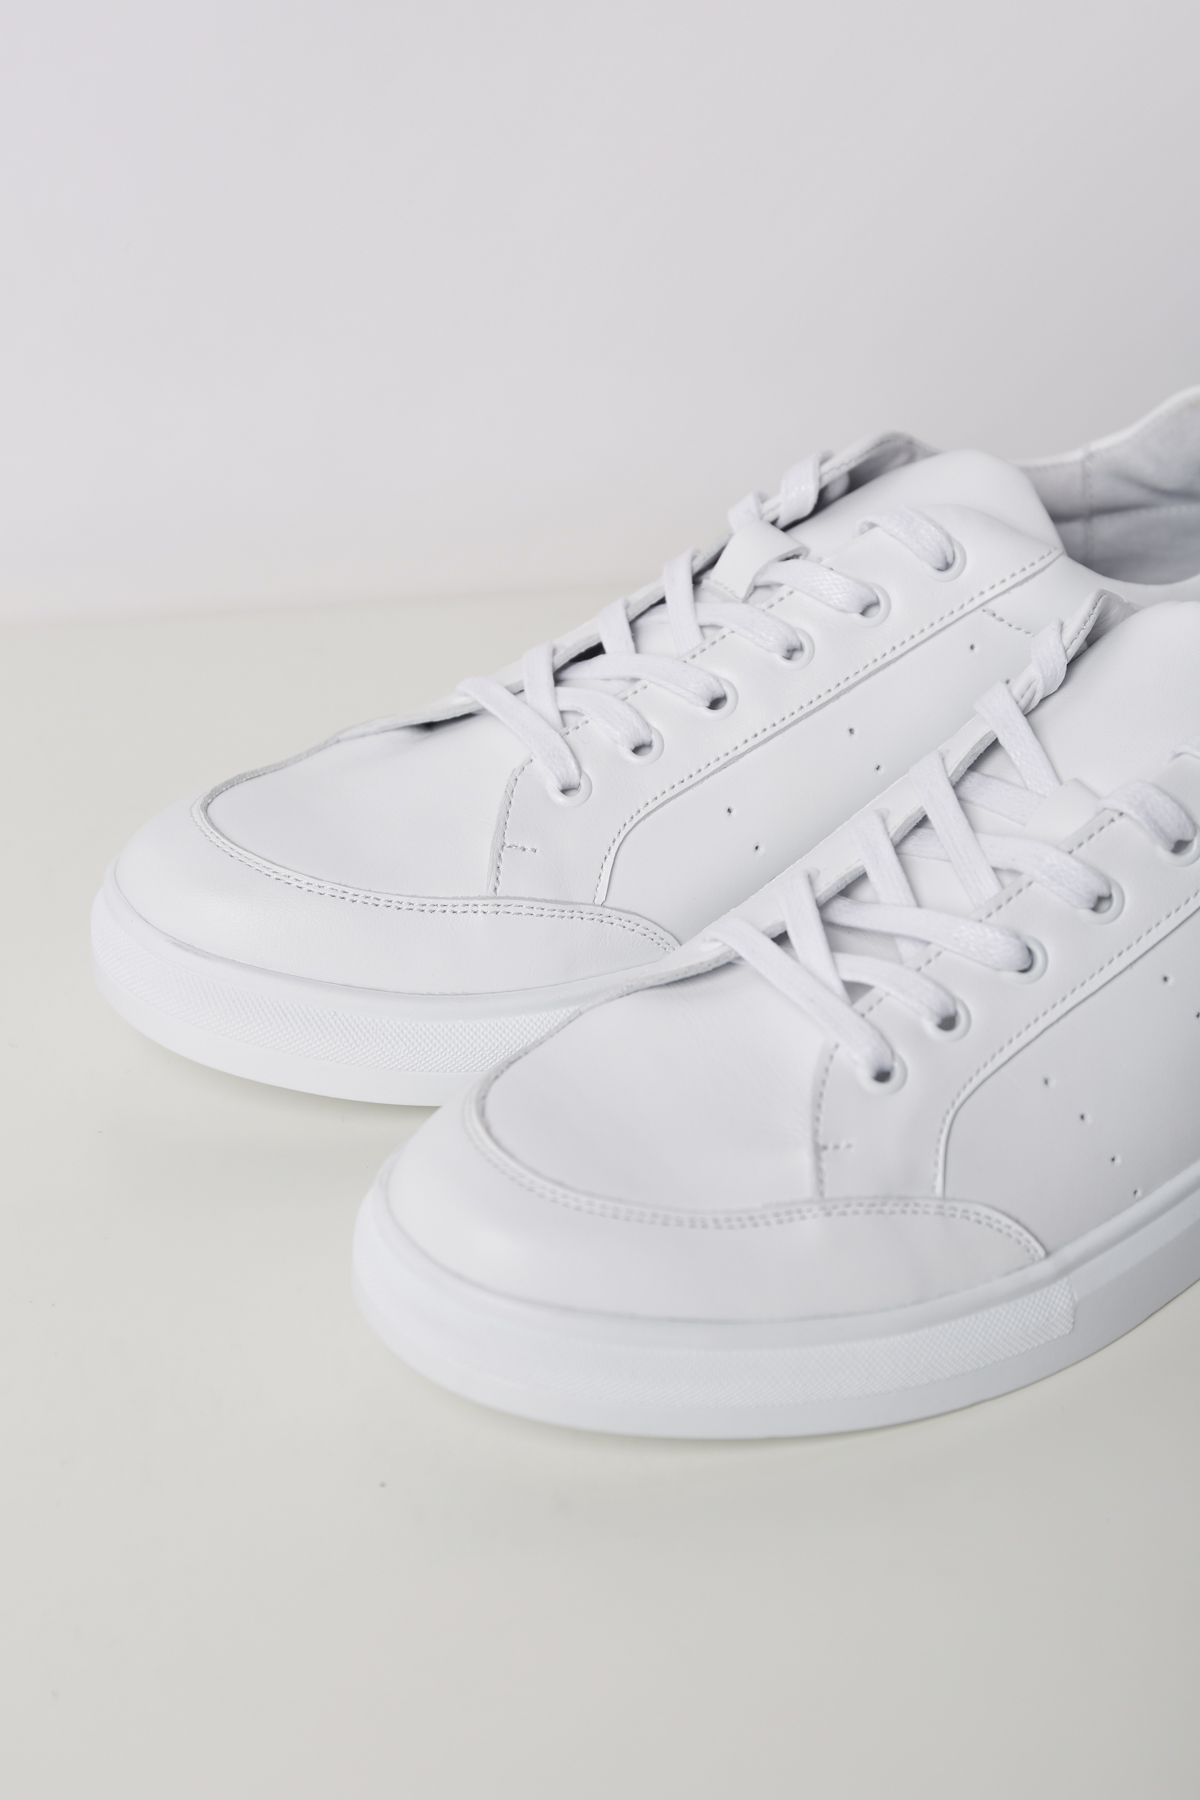 White leather sneakers, photo 5